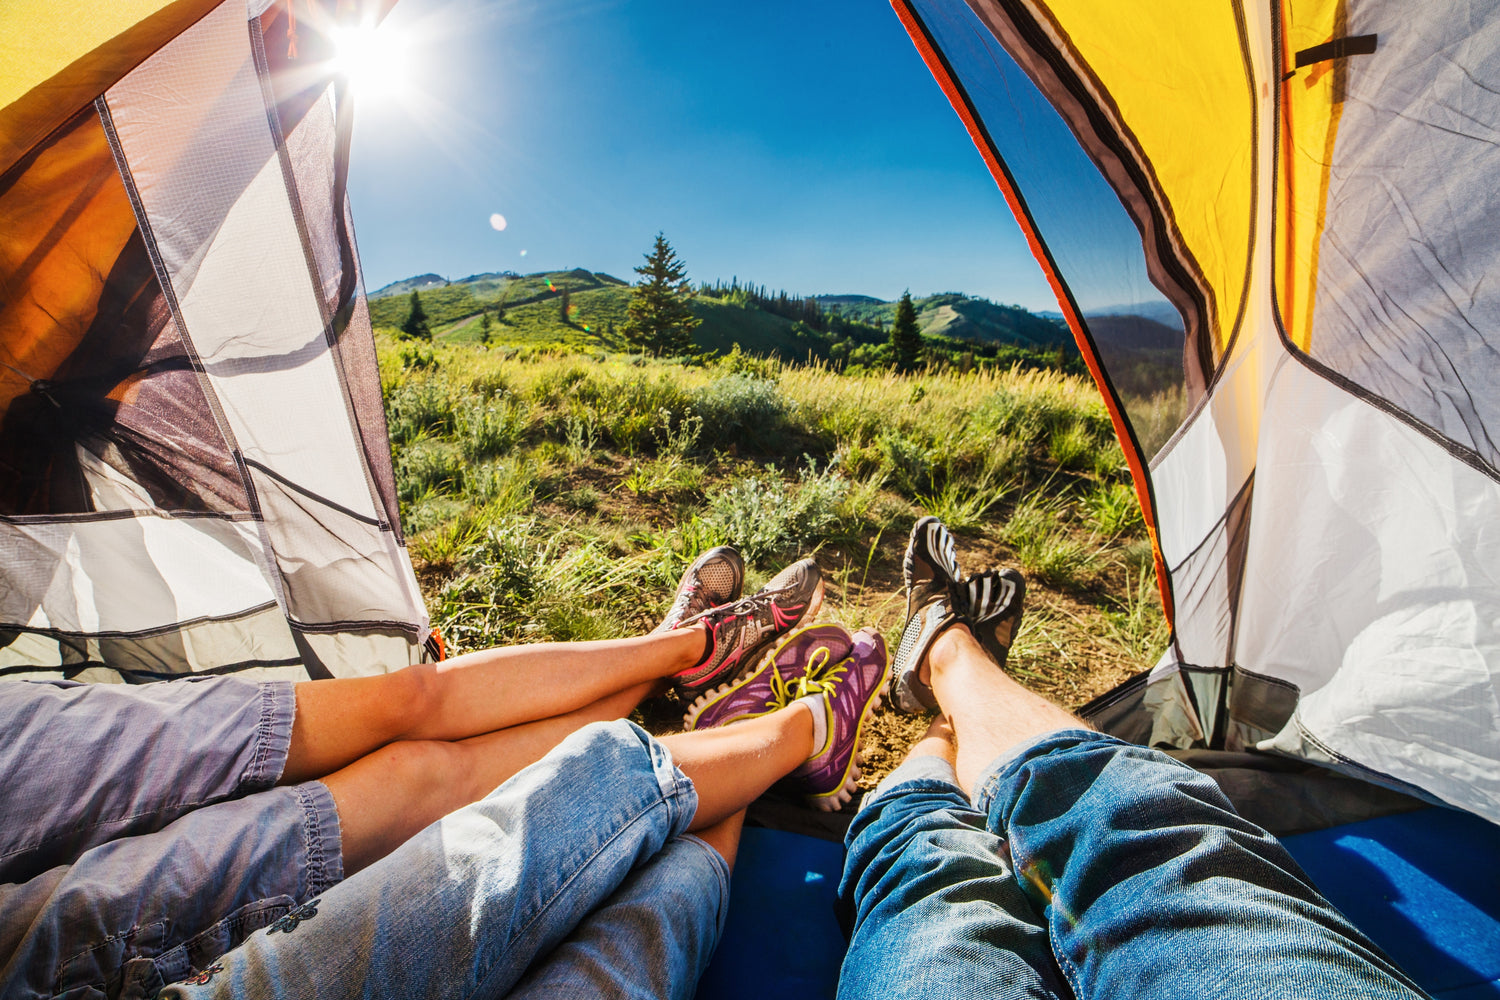 Must-do activities for a first camping trip